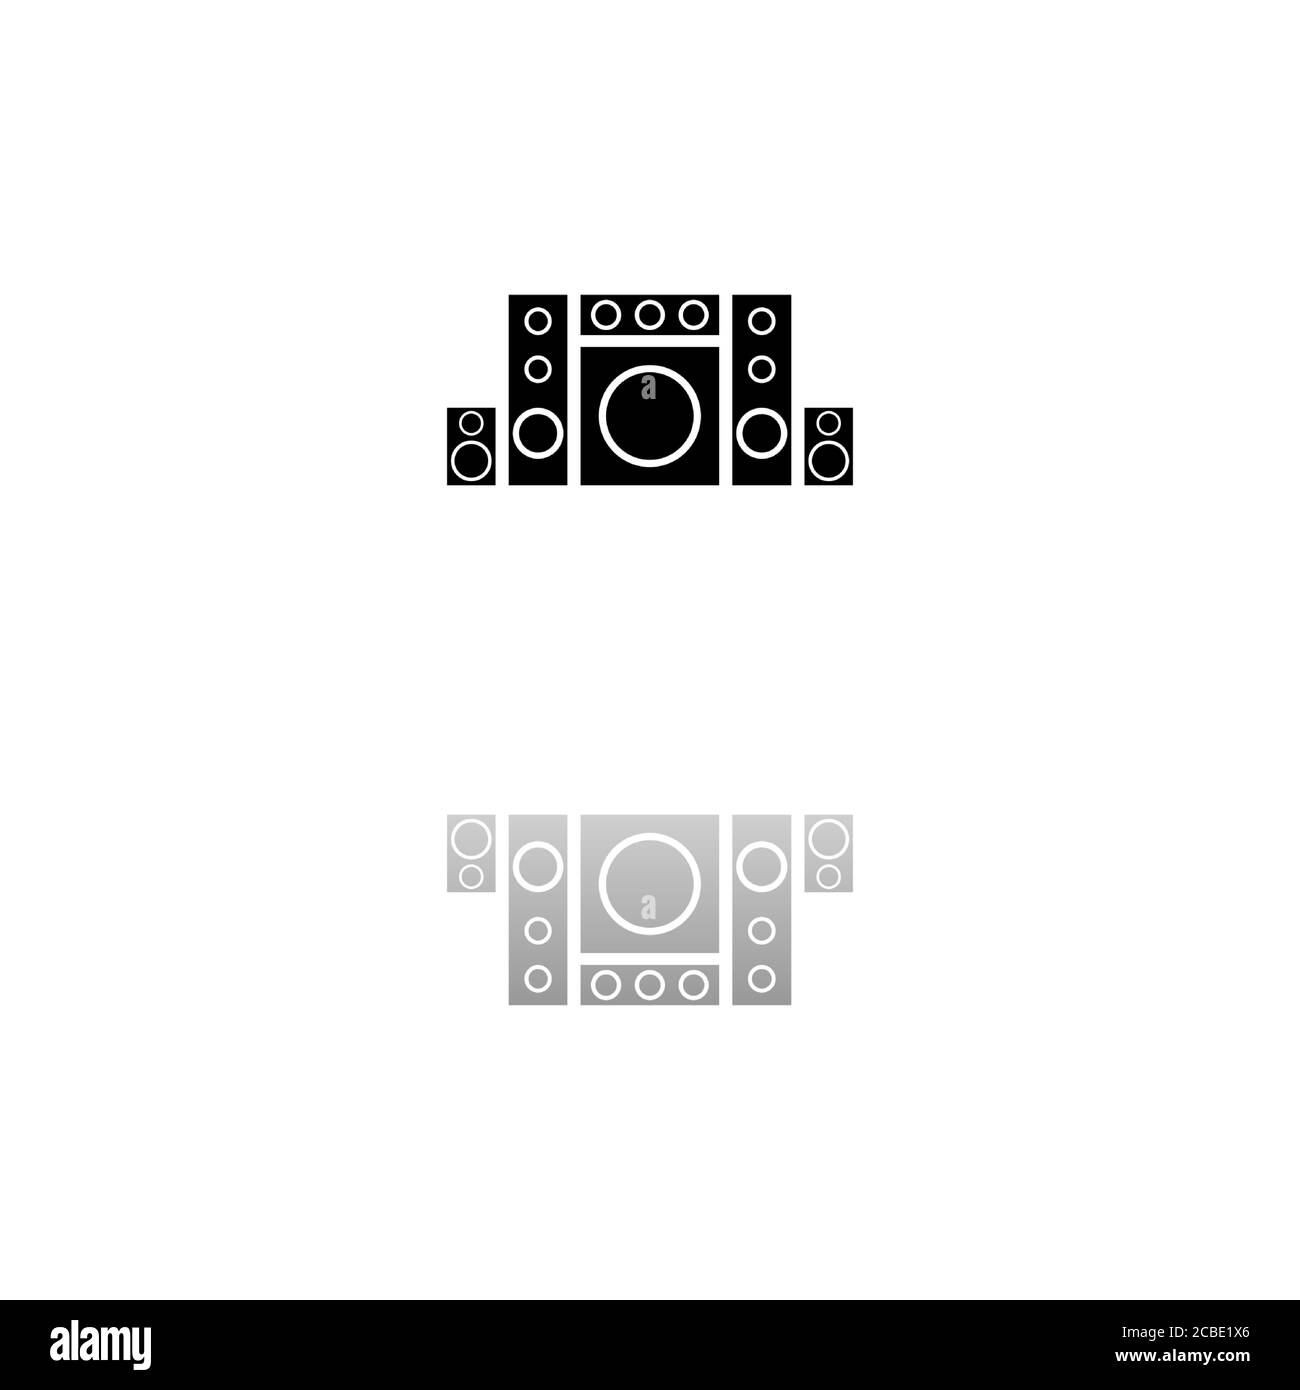 Home theater. Black symbol on white background. Simple illustration. Flat Vector Icon. Mirror Reflection Shadow. Can be used in logo, web, mobile and Stock Vector